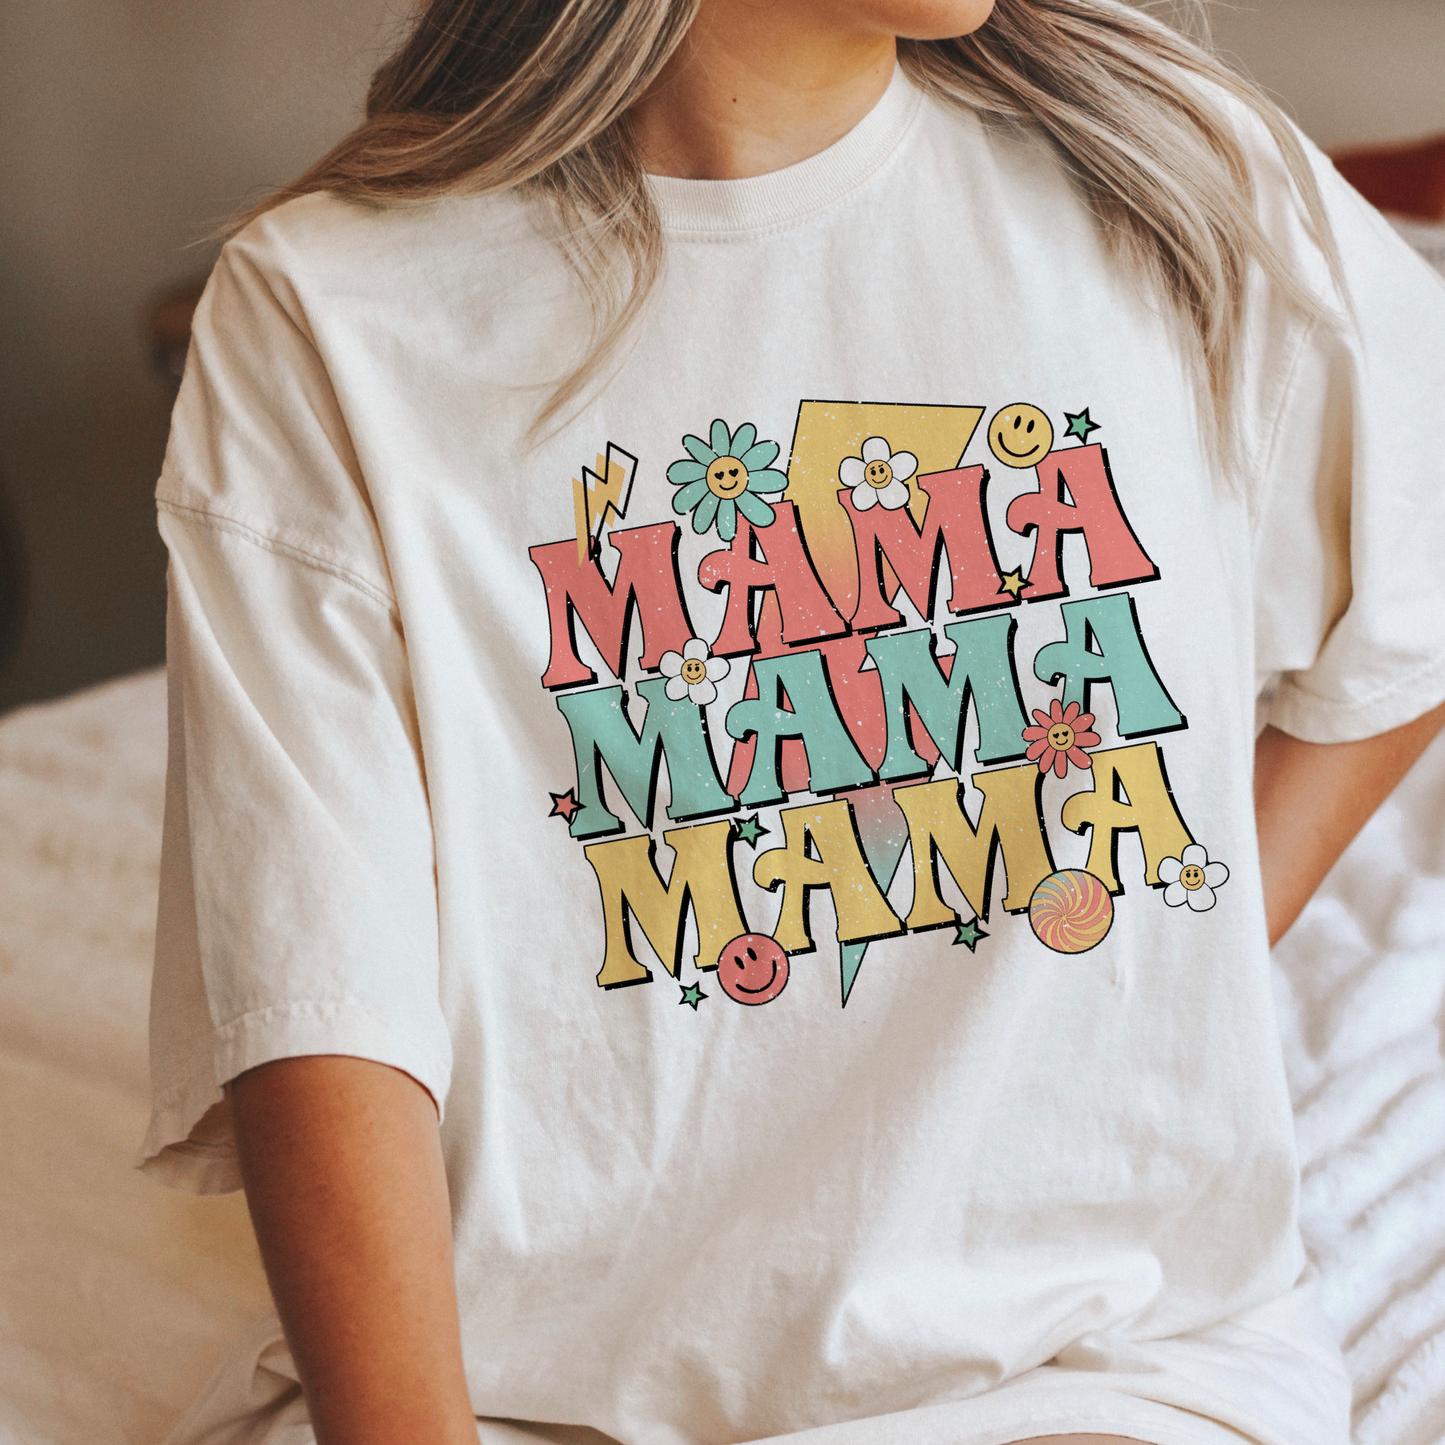 Mama retro vibes t shirt in Comfort Colors